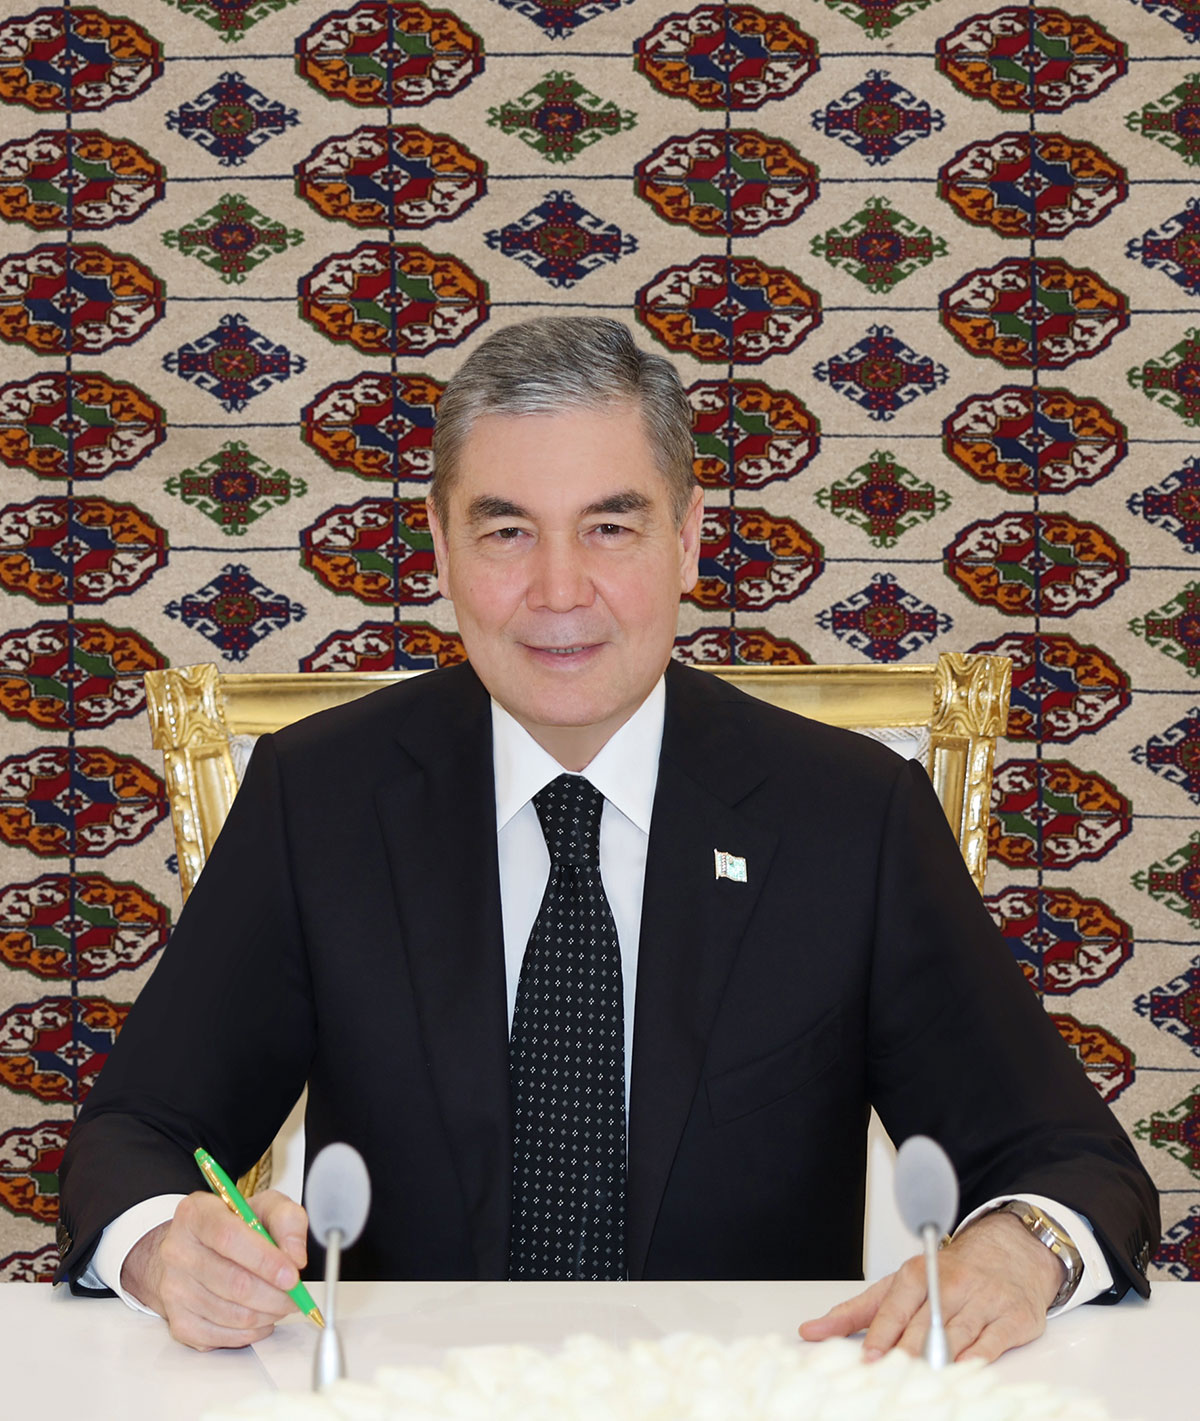 The National Leader of the Turkmen people, Chairman of the Khalk Maslakhaty of Turkmenistan took part in a stone-laying ceremony of new healthcare projects